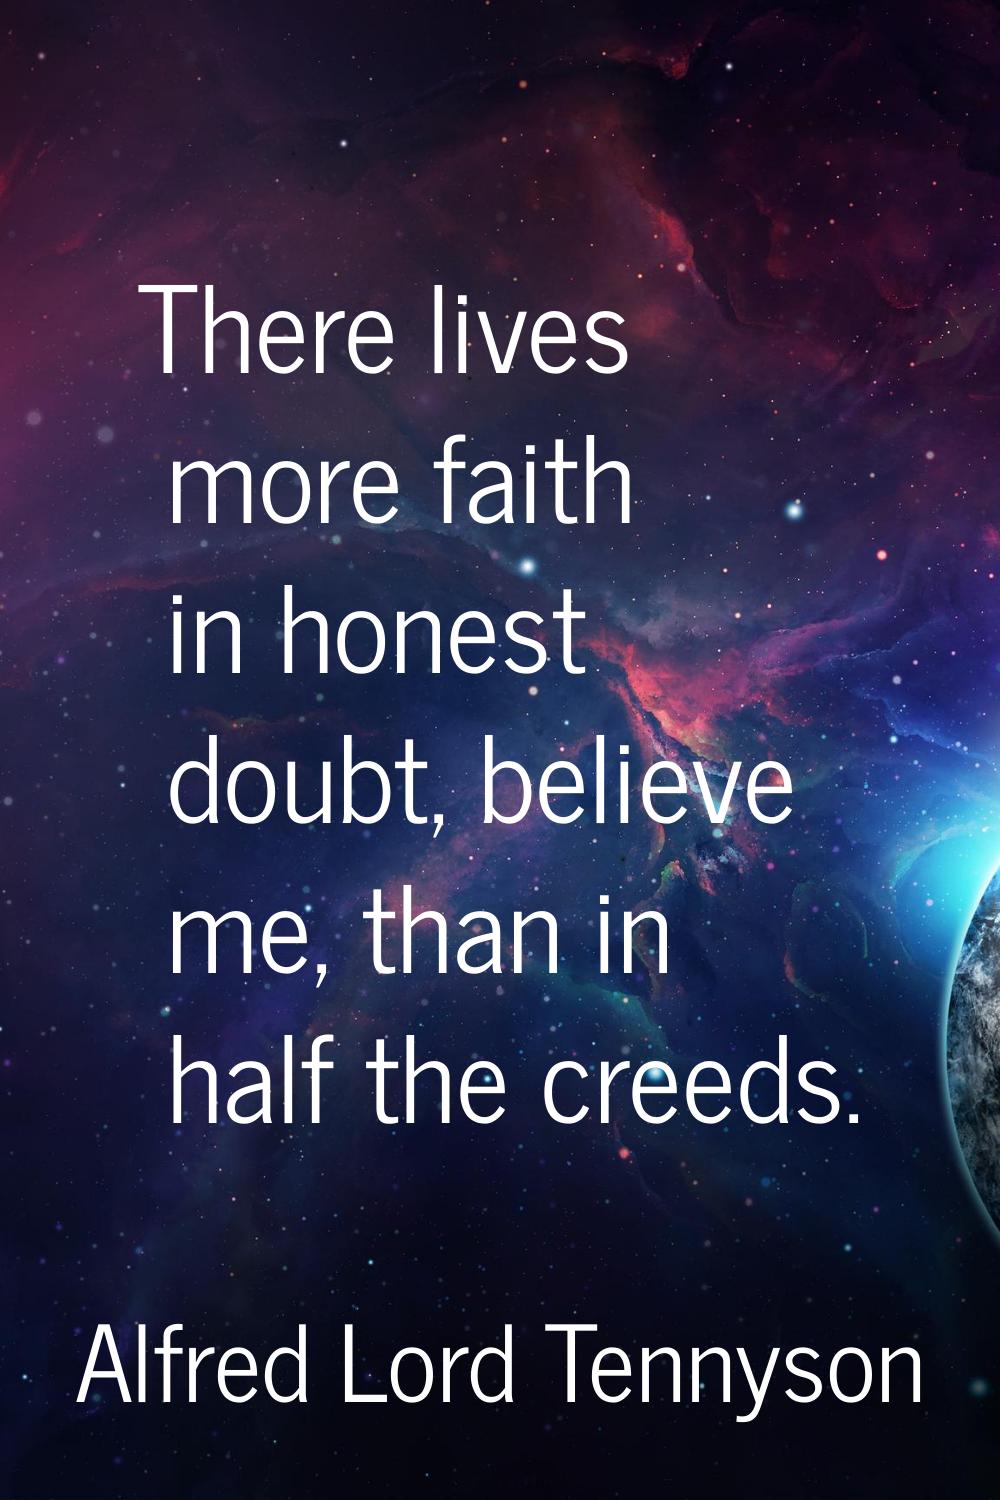 There lives more faith in honest doubt, believe me, than in half the creeds.